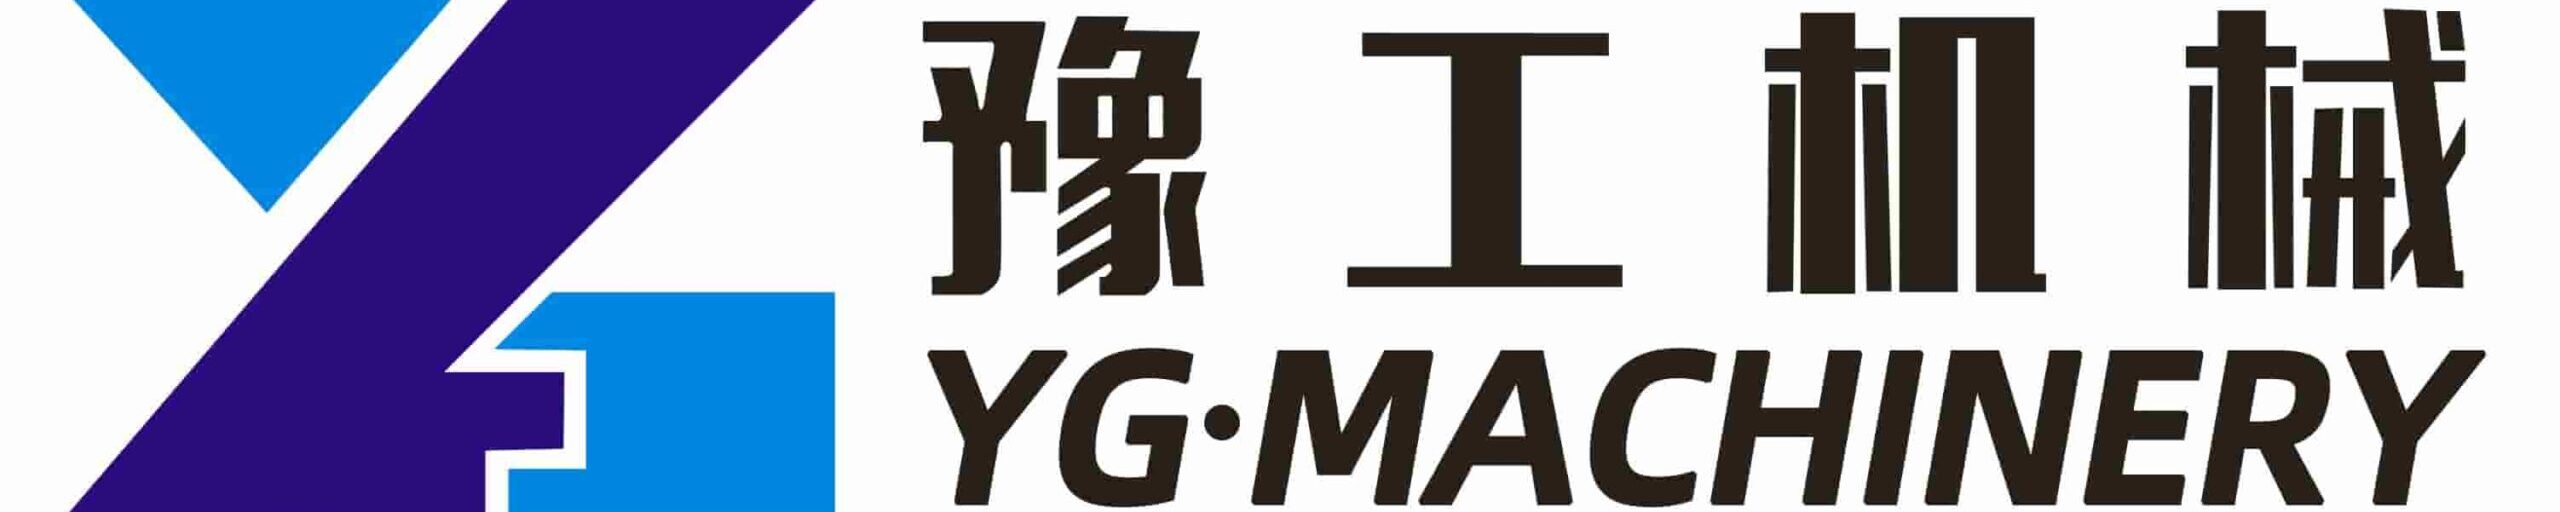 Recognized Professional Drilling Rig Manufacturer- YG Machinery